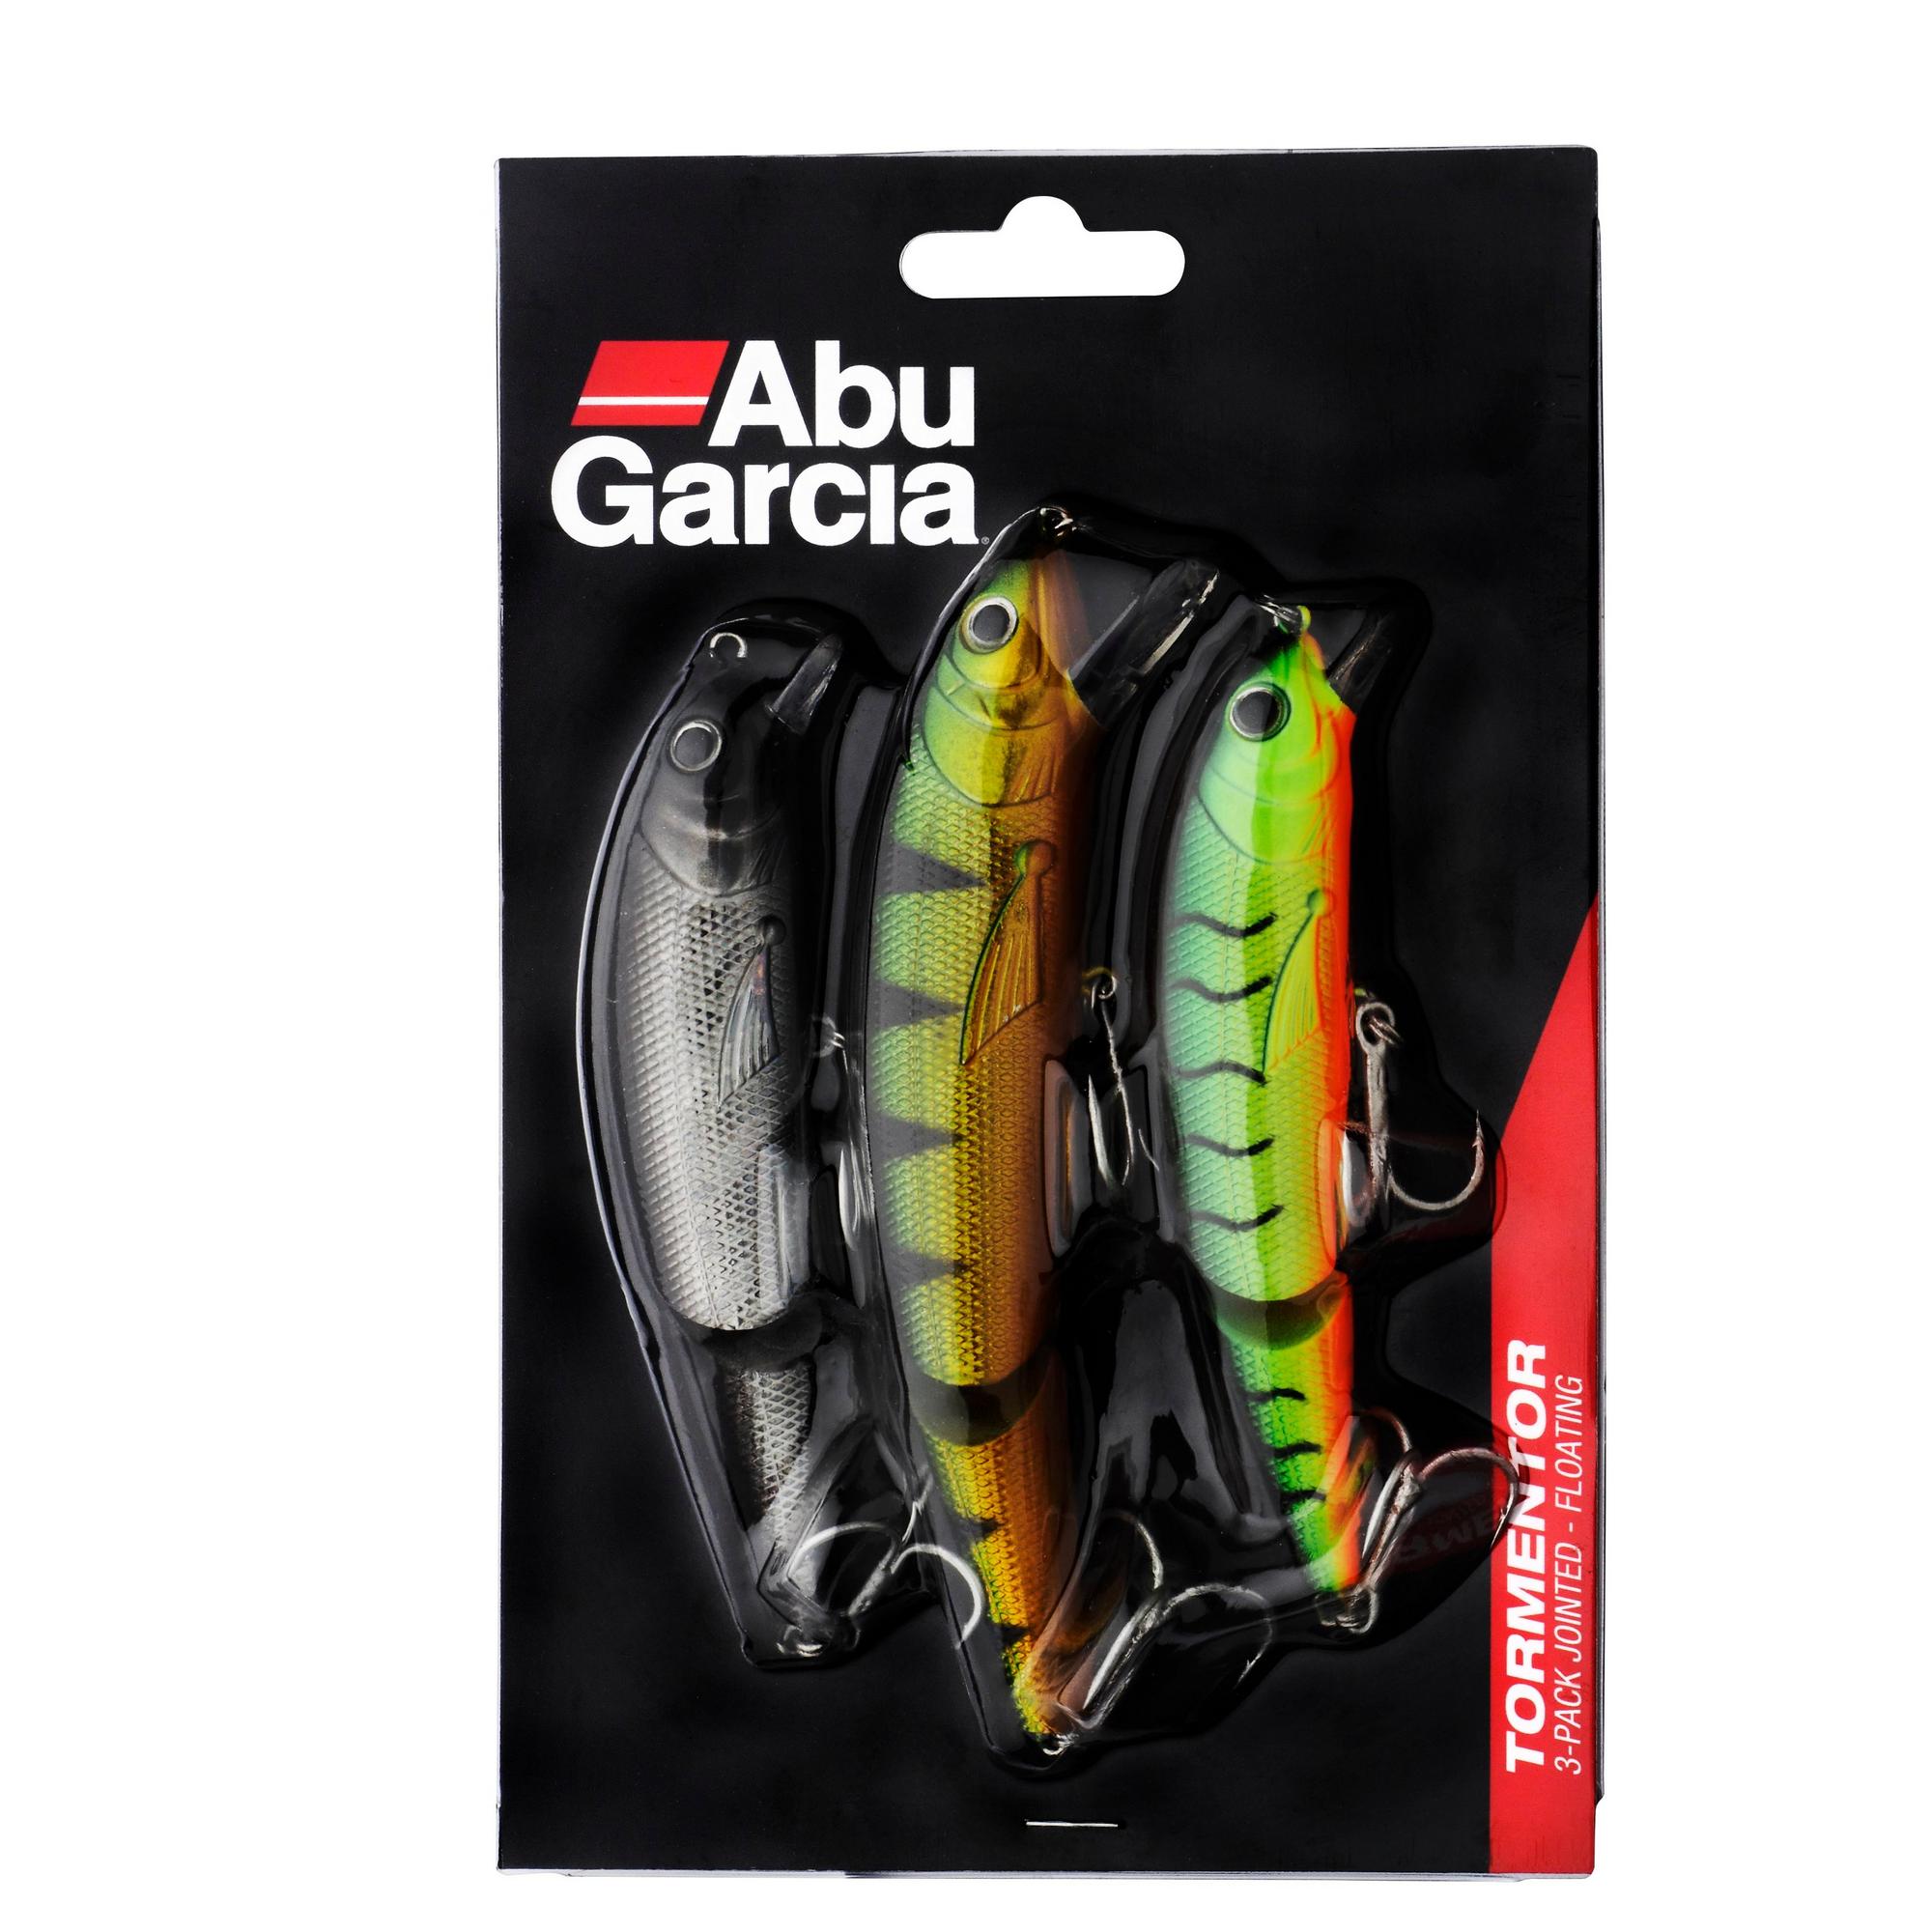 Abu Garcia Tormentor 3 Pack Lures - Jointed